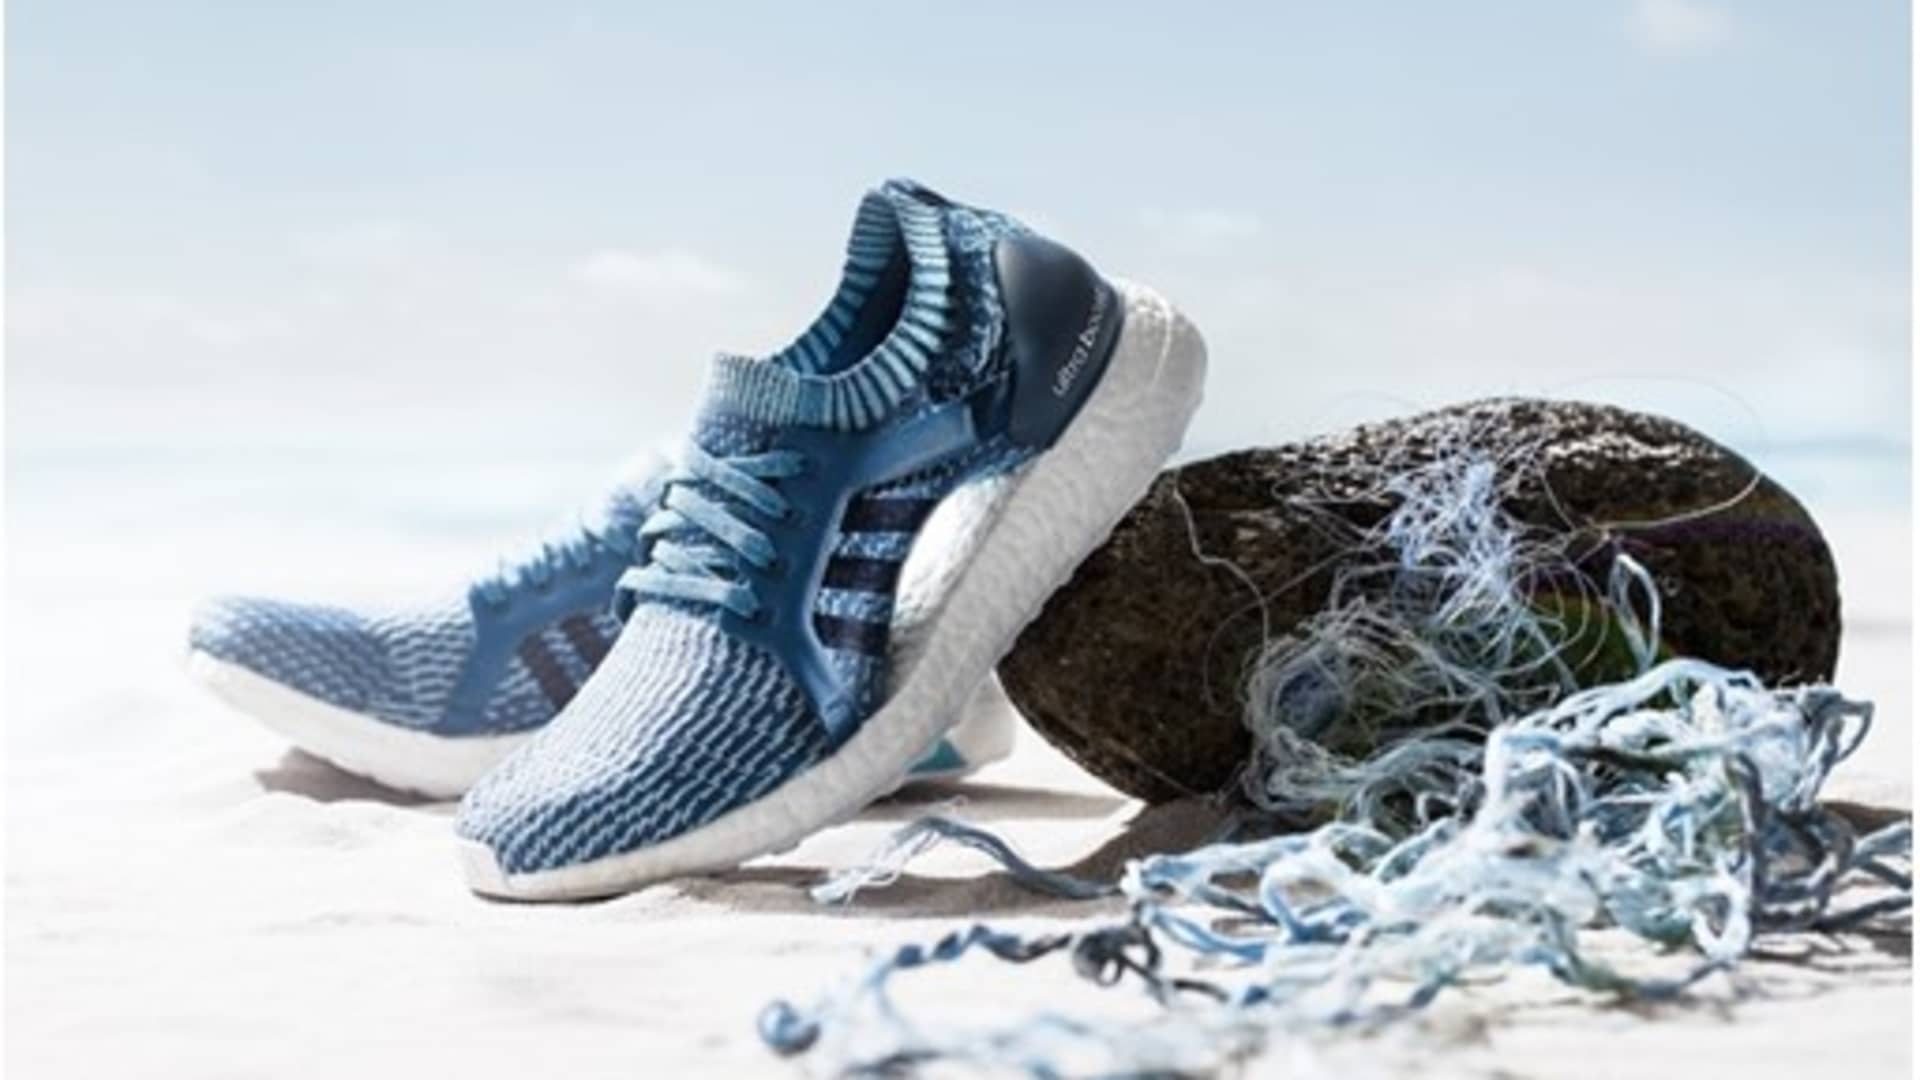 Adidas sold 1 million shoes made out of ocean plastic in 2017